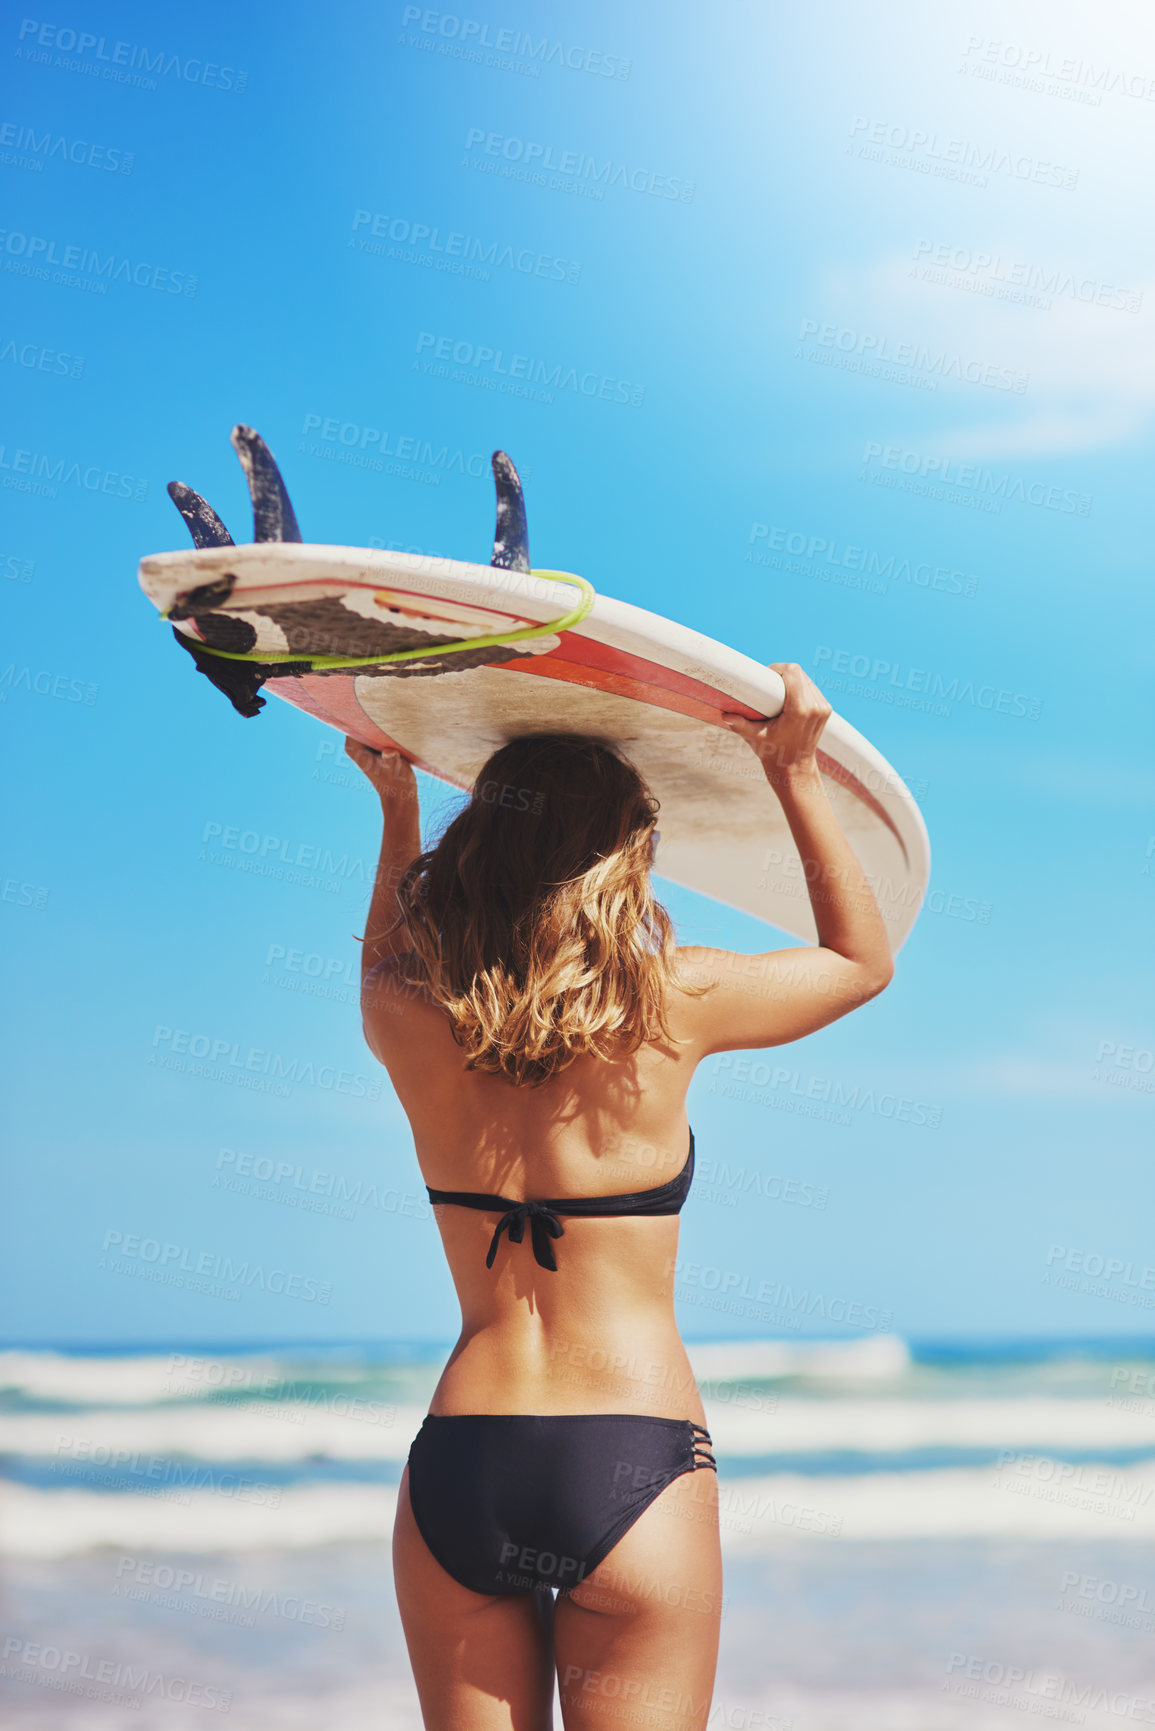 Buy stock photo Rearview shot of a young surfer holding her surfboard on her head at the beach